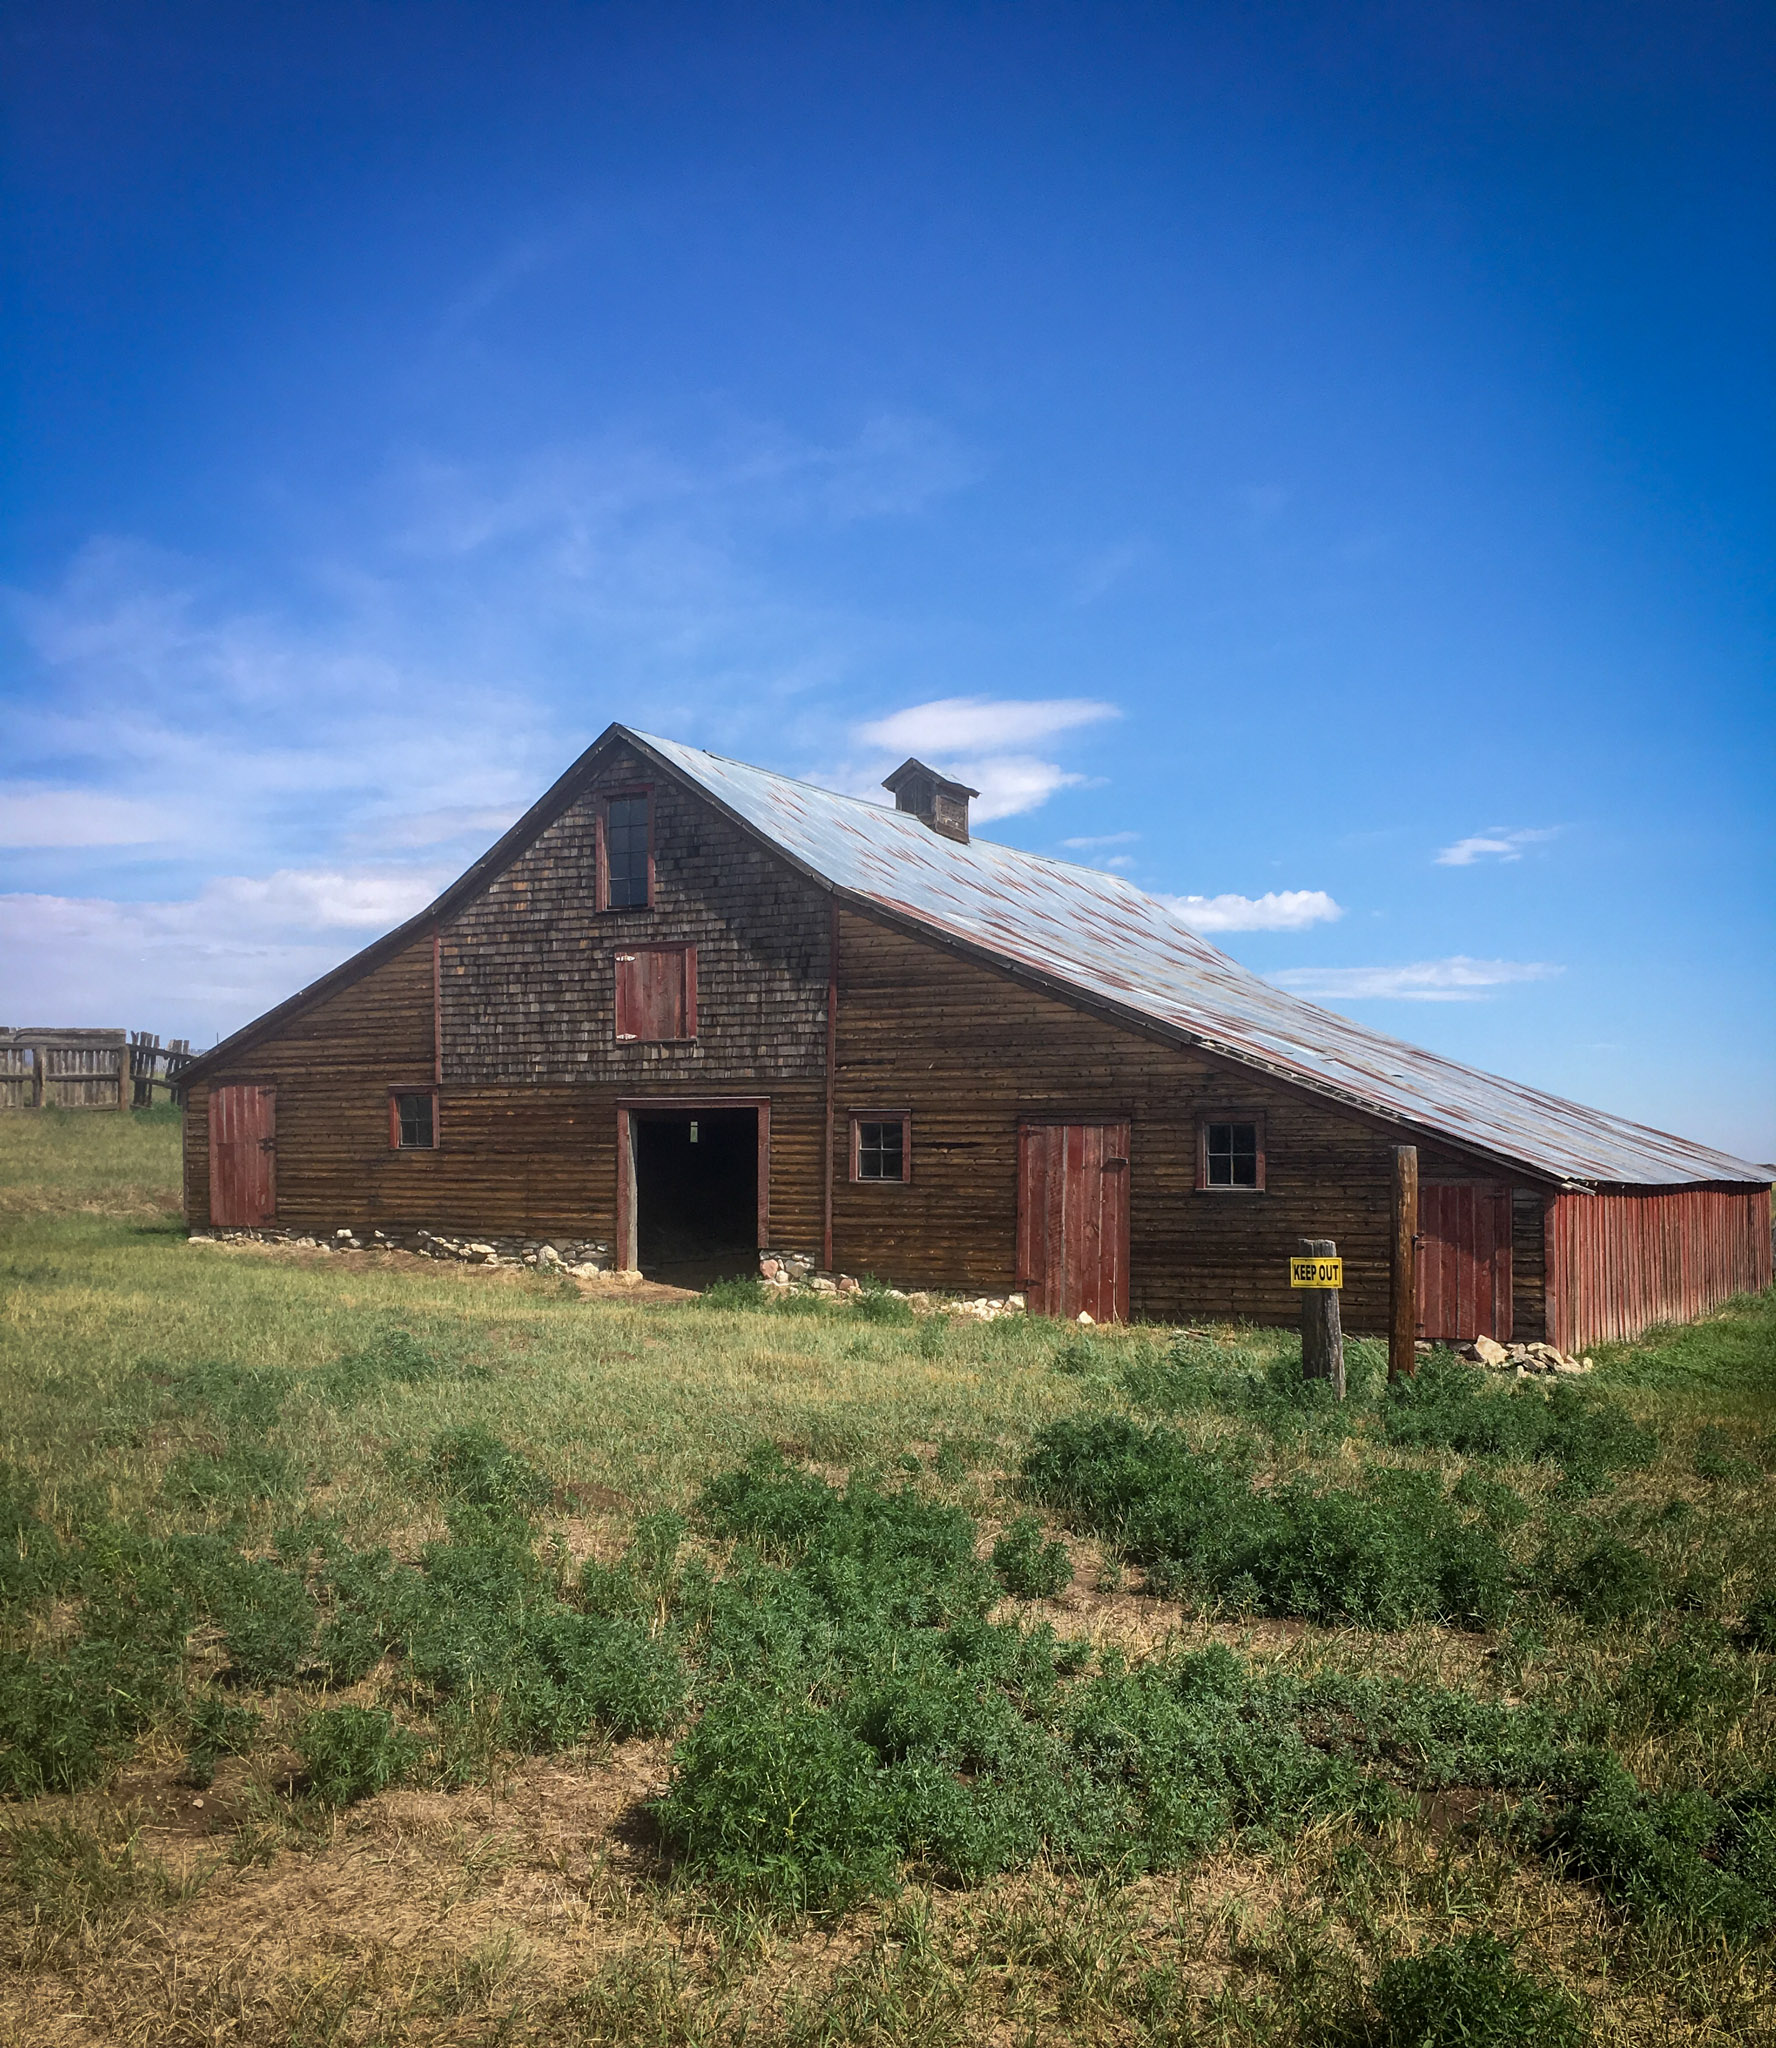 Front view of a historic red barn on a summer day.